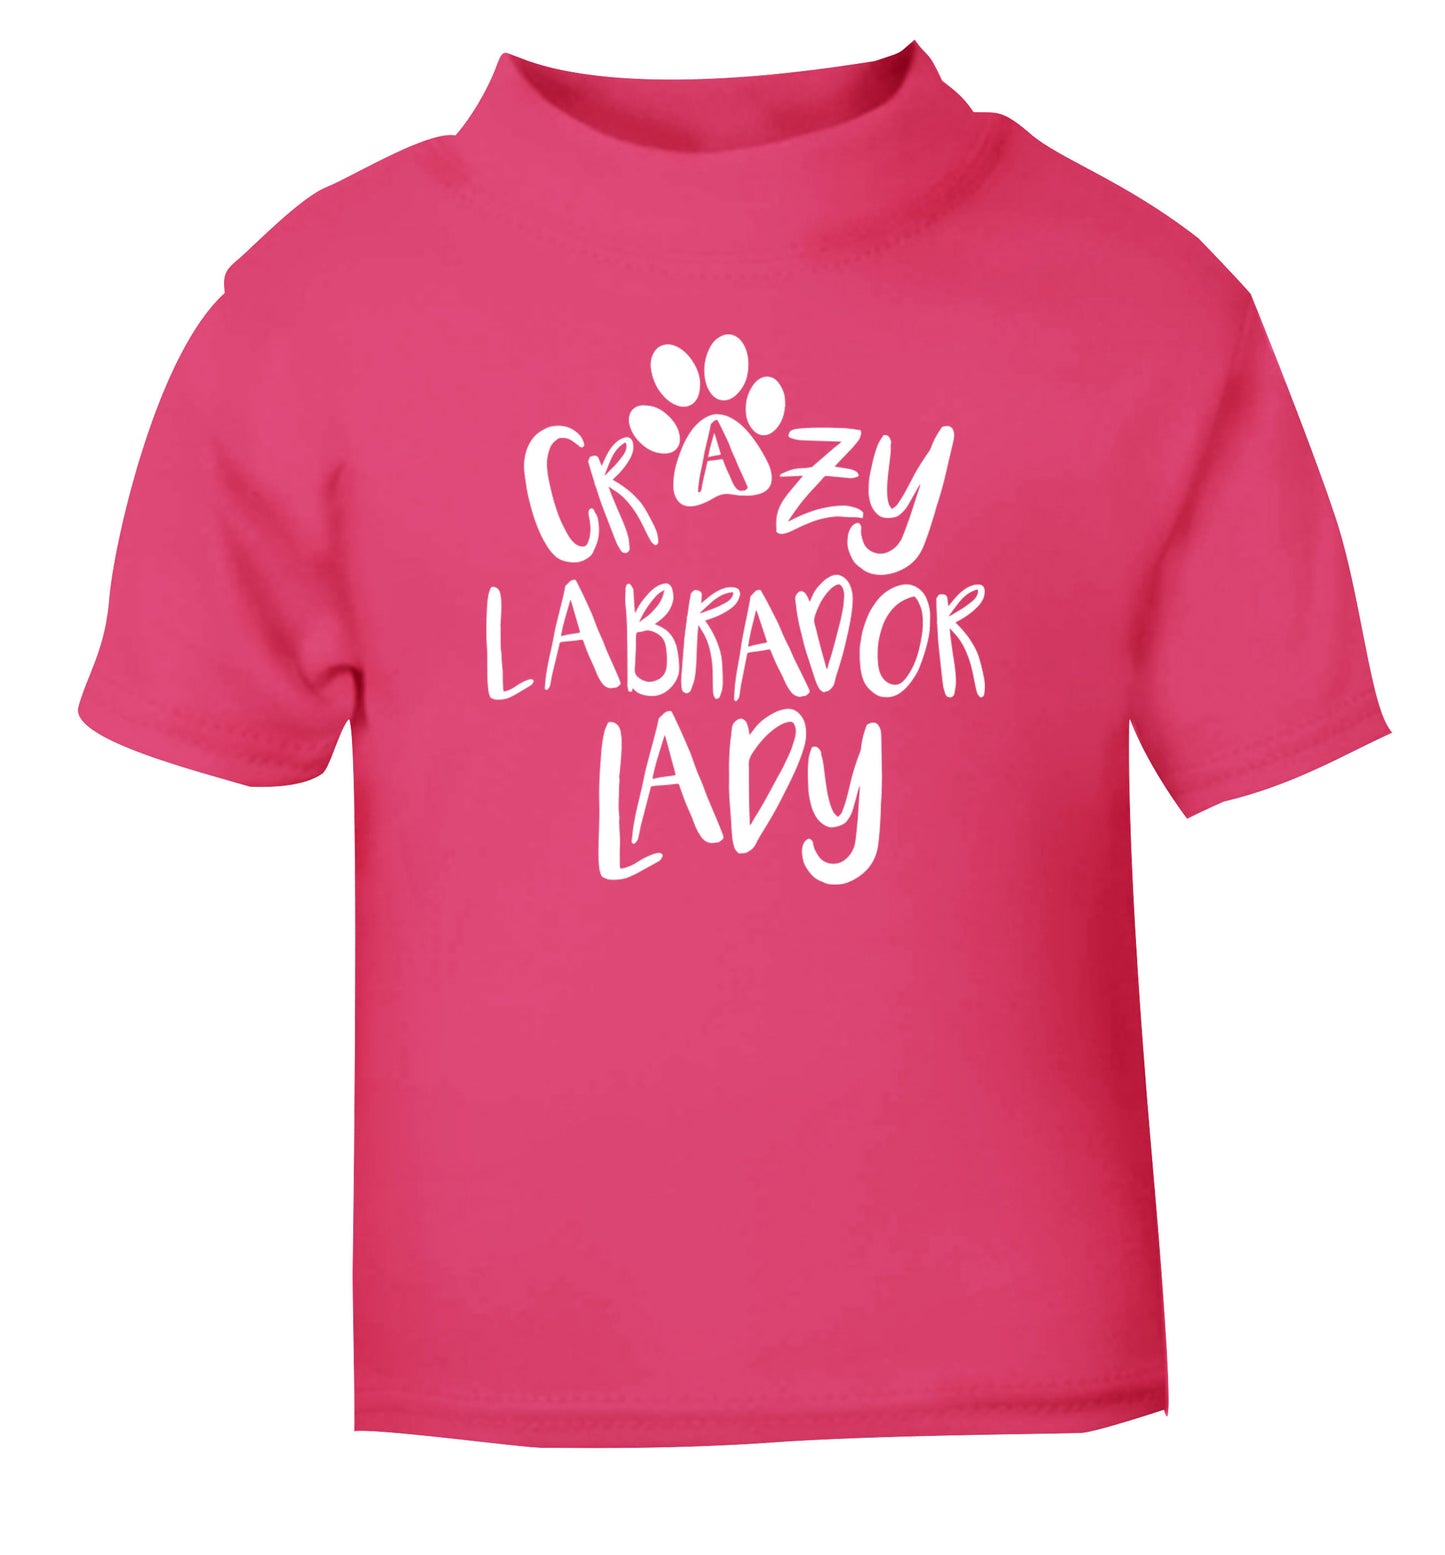 Crazy labrador lady pink Baby Toddler Tshirt 2 Years